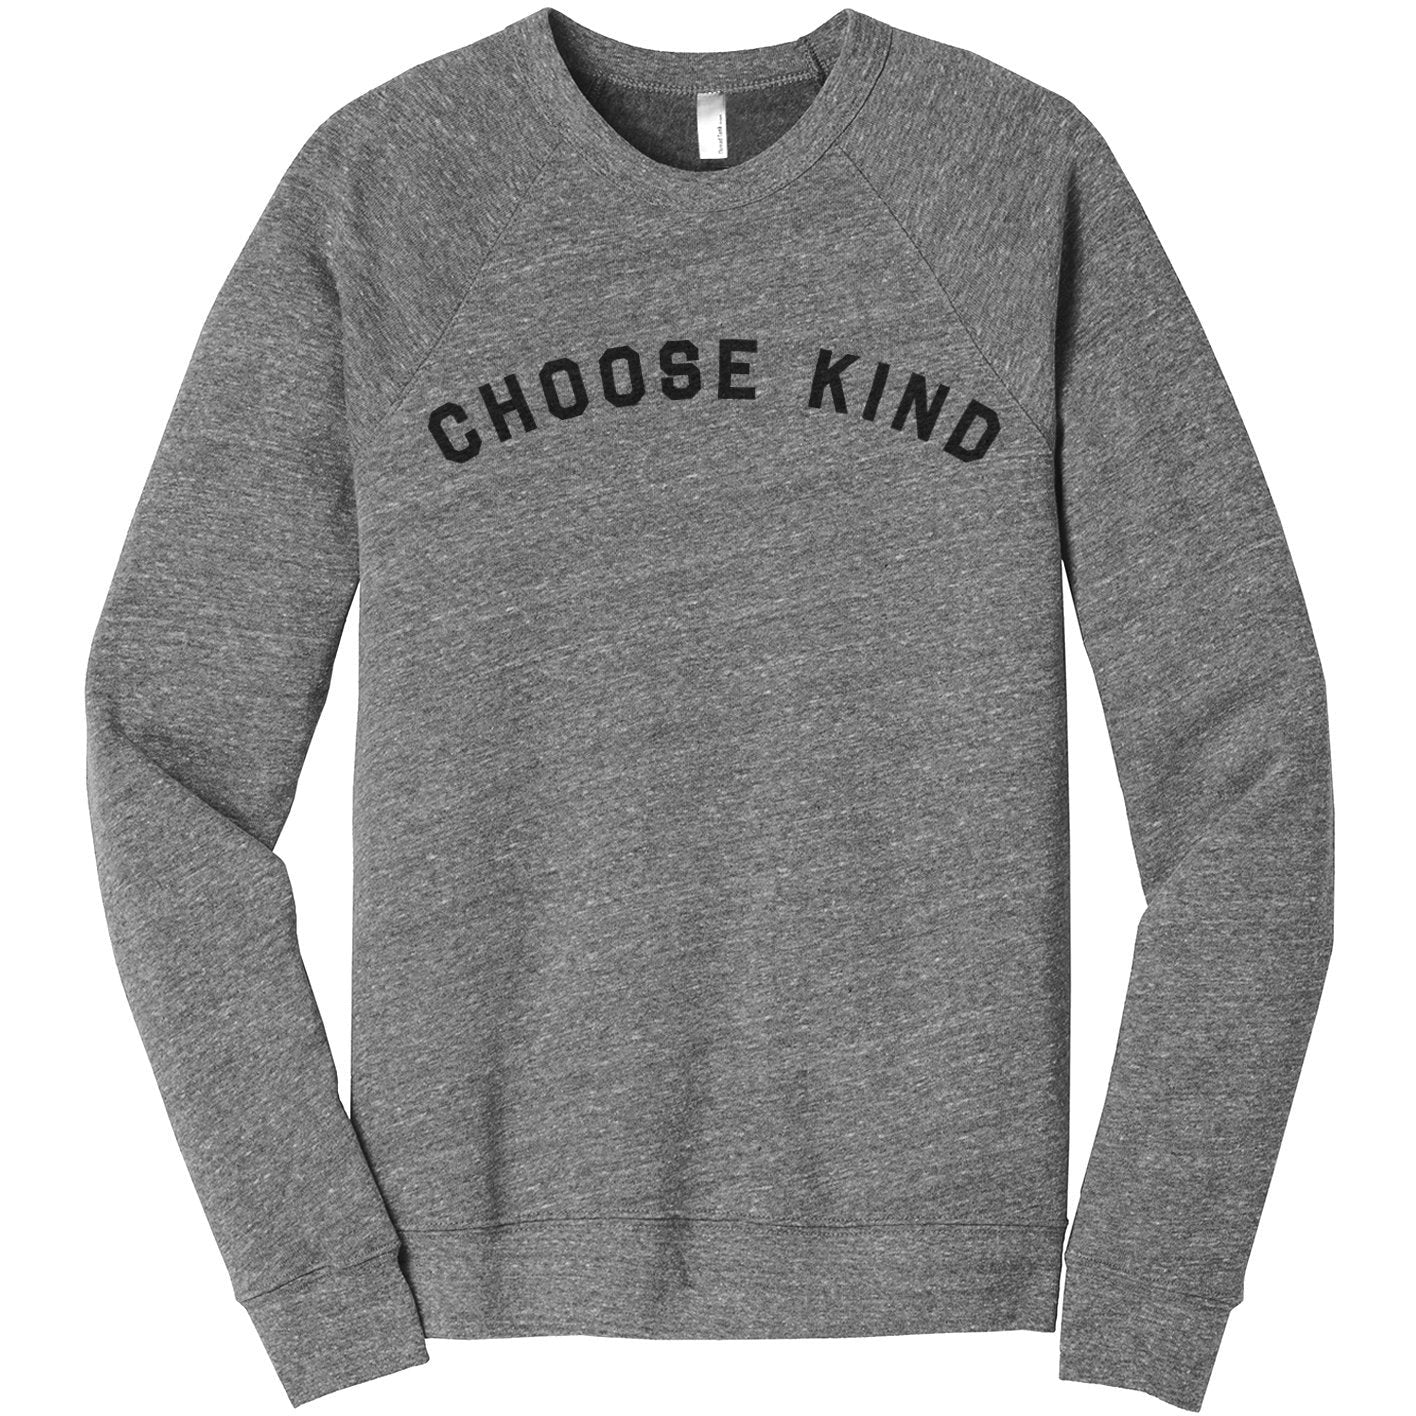 Choose Kind - Thread Tank | Stories You Can Wear | T-Shirts, Tank Tops and Sweatshirts